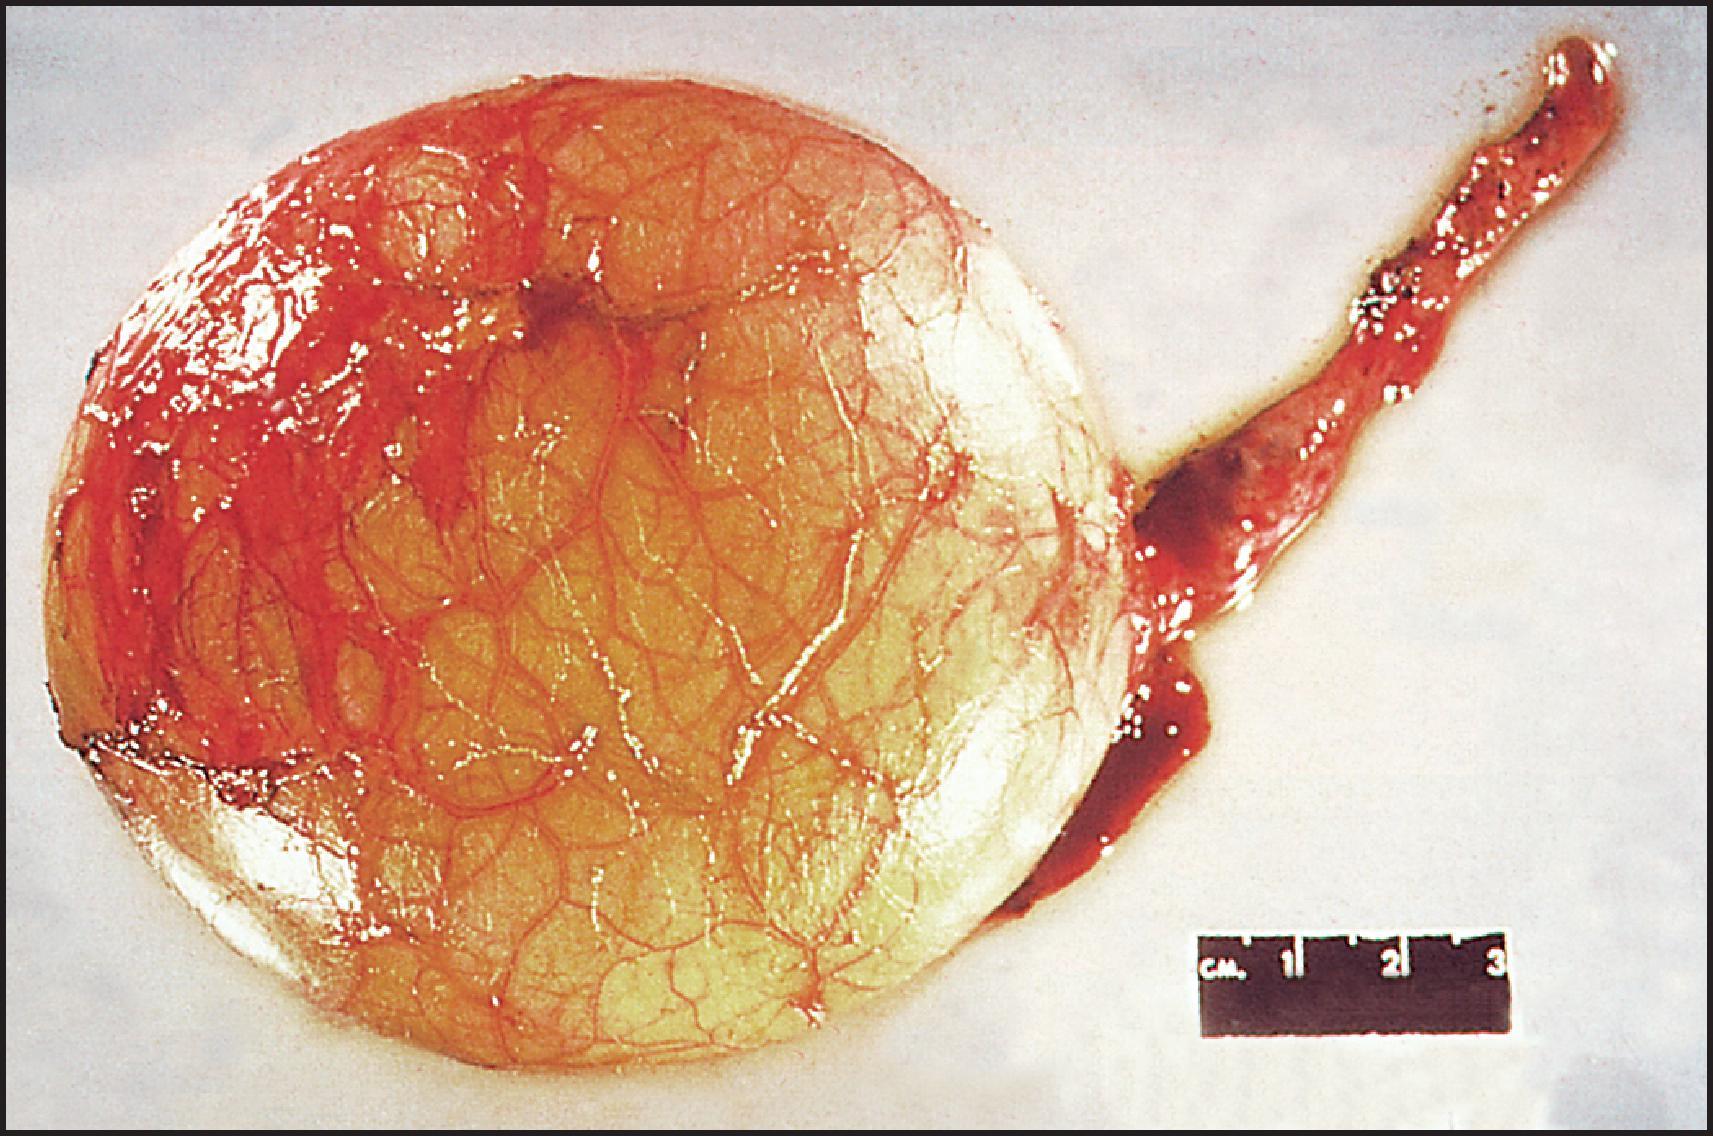 Figure 3.22, Choledochal cyst measuring about 10 cm in diameter. Note numerous vessels over the surface.